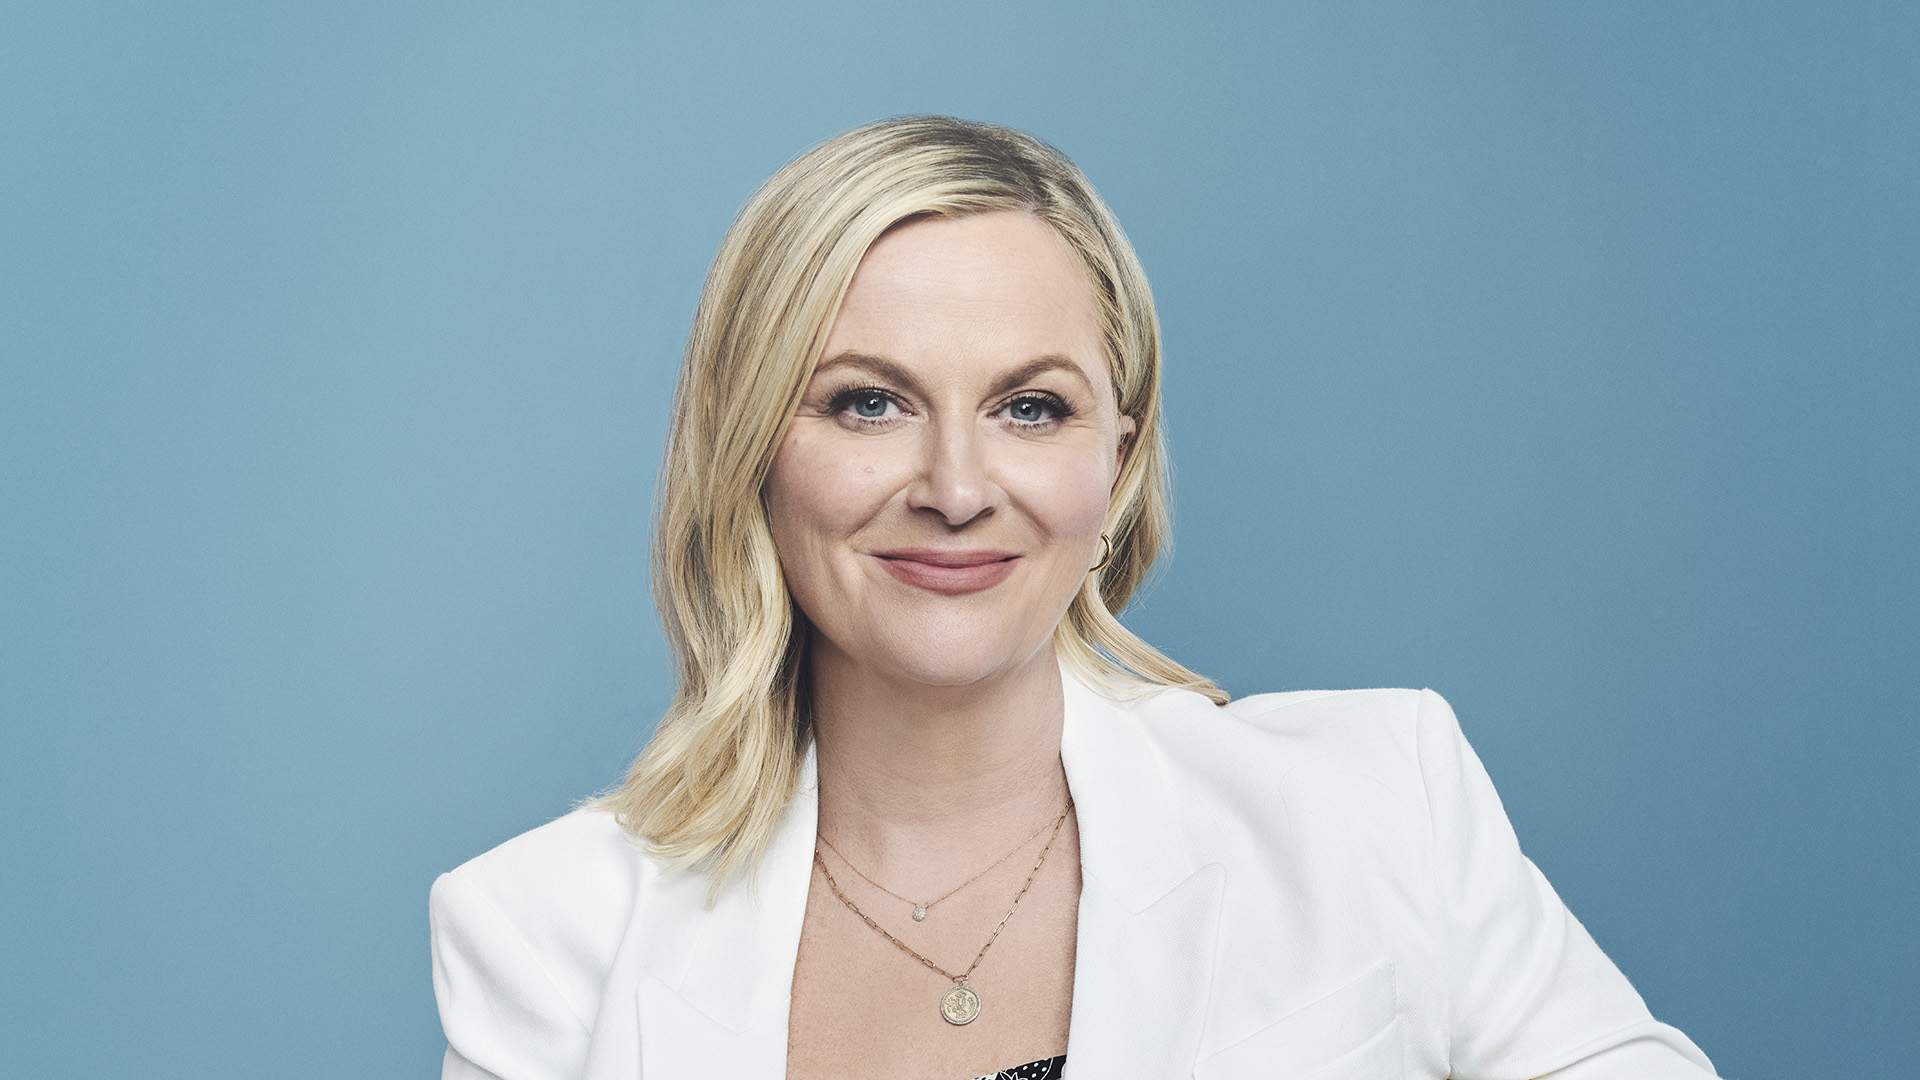 Amy Poehler Is Coming to Australia to Chat About 'Inside Out 2' and Her Exceptional Career at Vivid Sydney